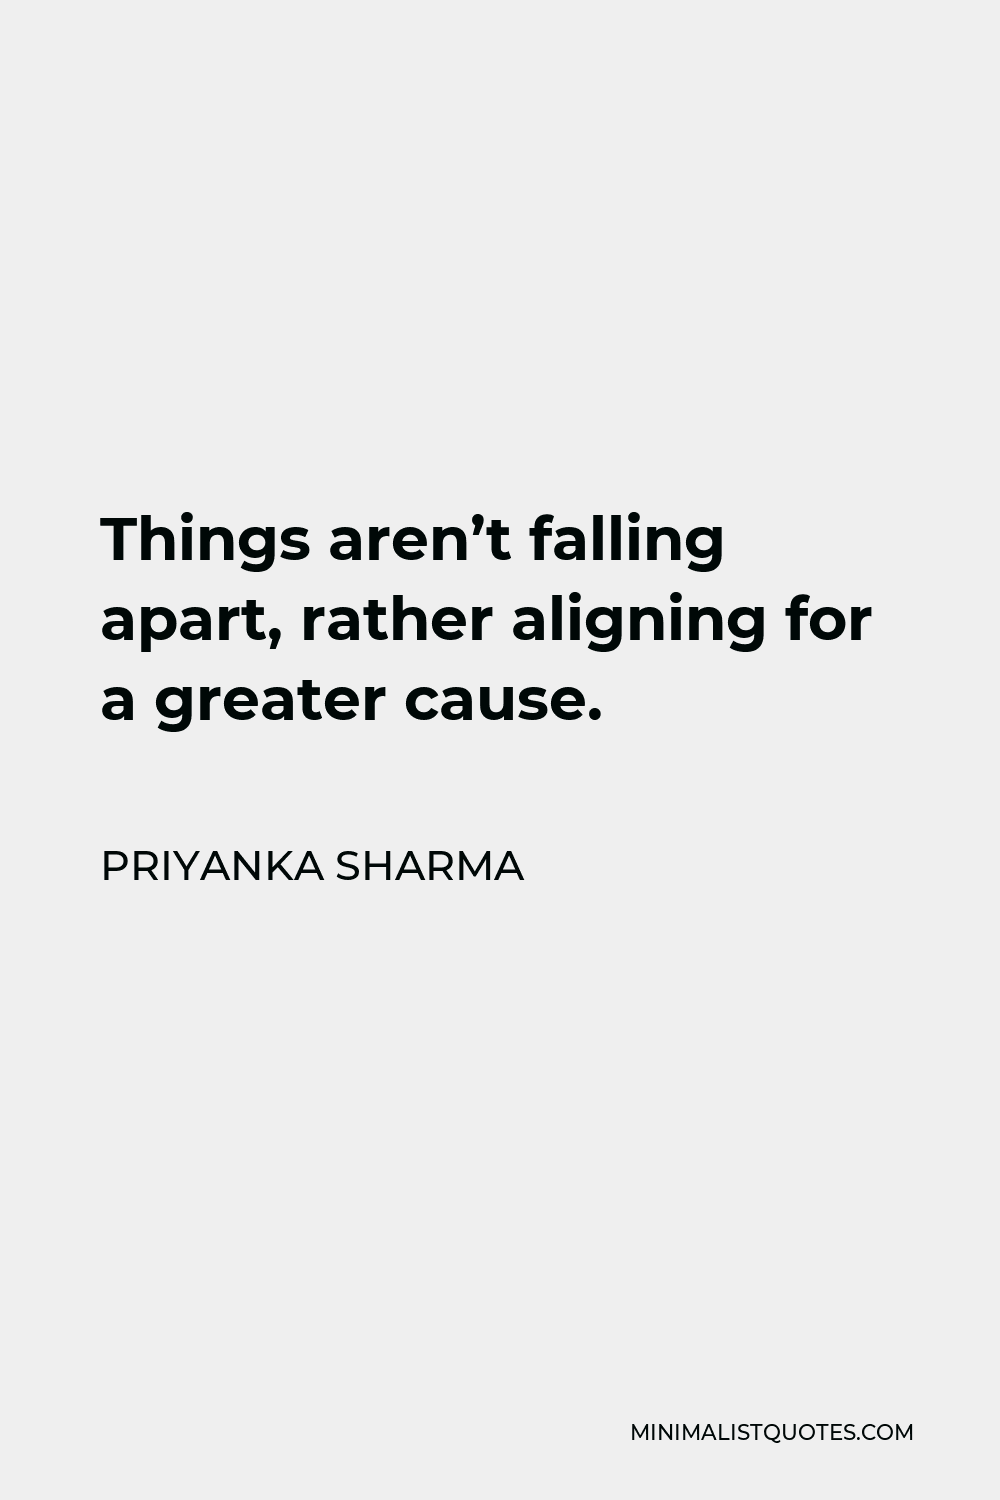 Priyanka Sharma Quote - Things aren’t falling apart, rather aligning for a greater cause.